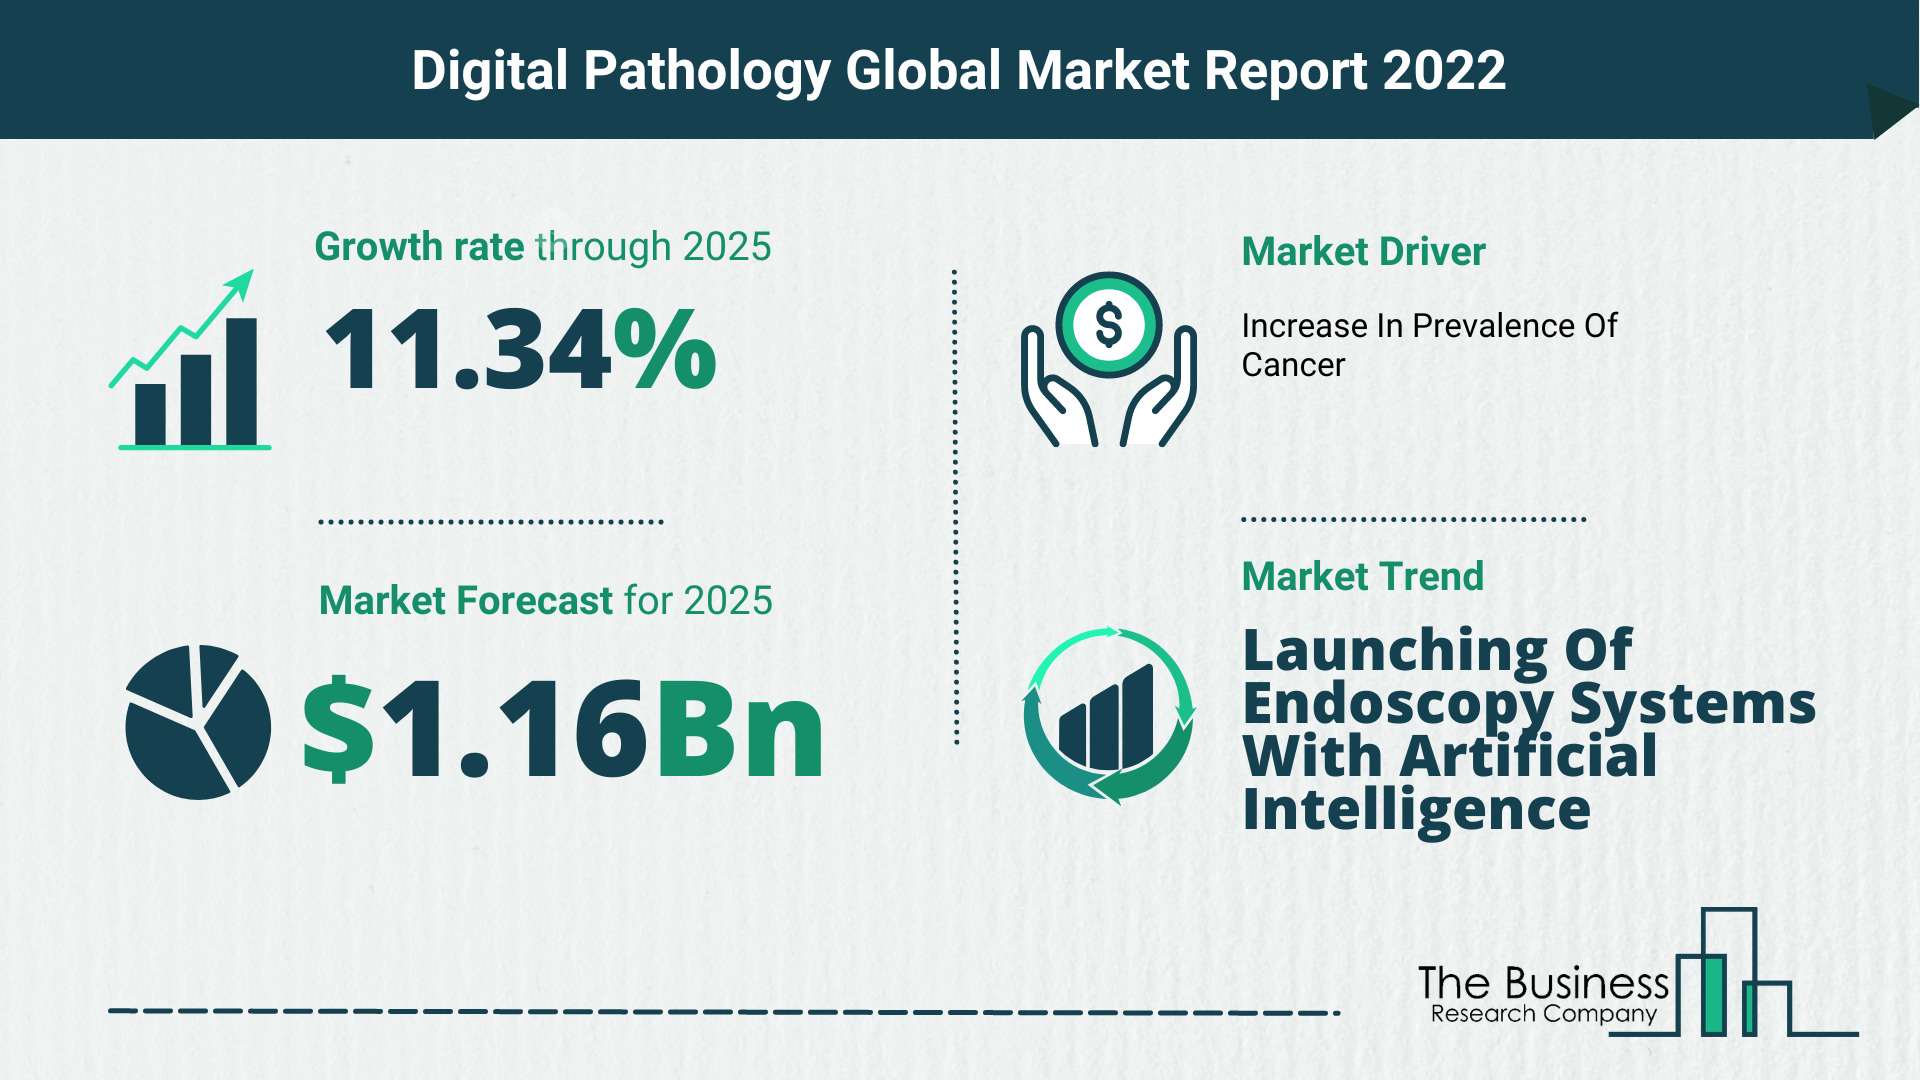 What Is The Digital Pathology Market Overview In 2022?